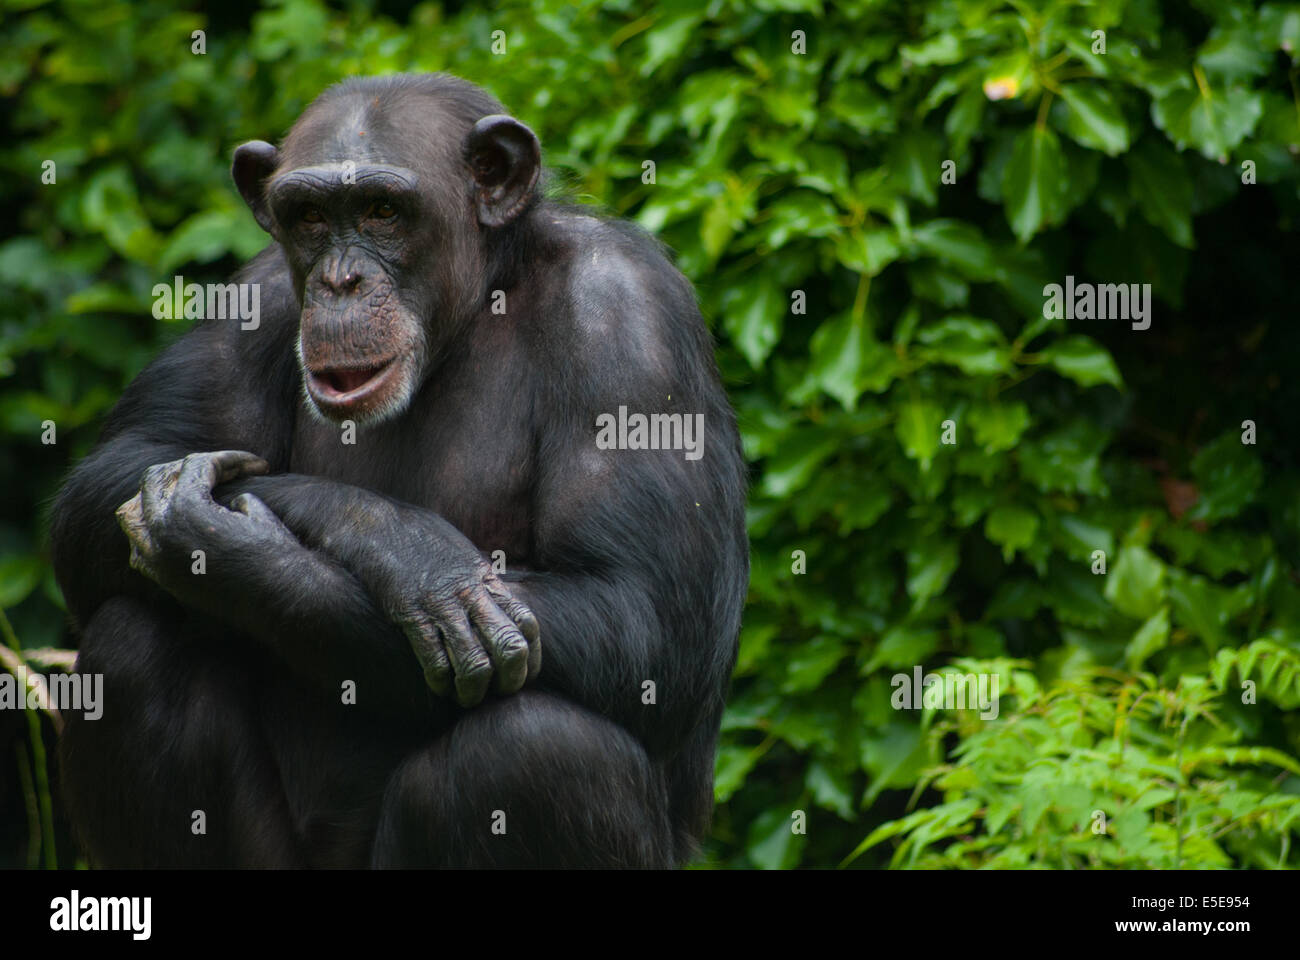 Chimpanzee close up looking deep in thought Stock Photo